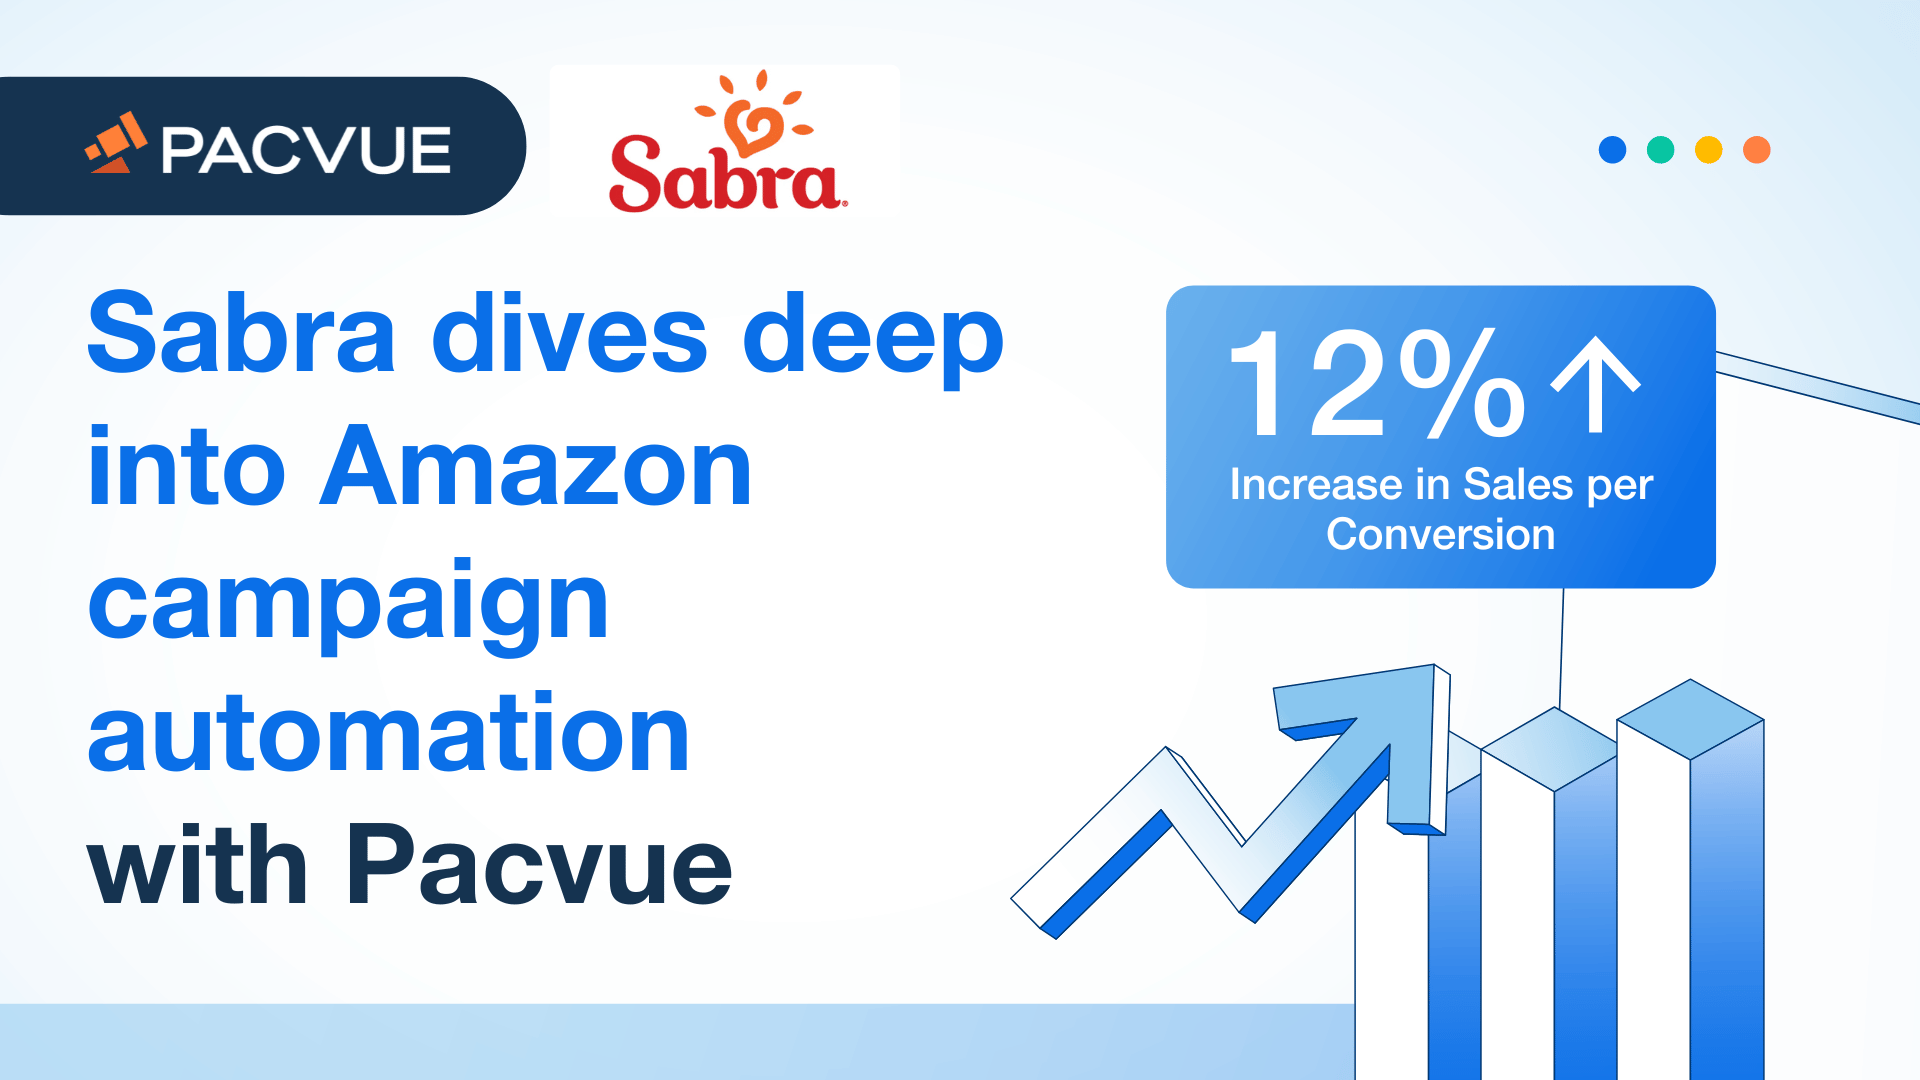 Sabra dives deep into Amazon campaign automation with Pacvue